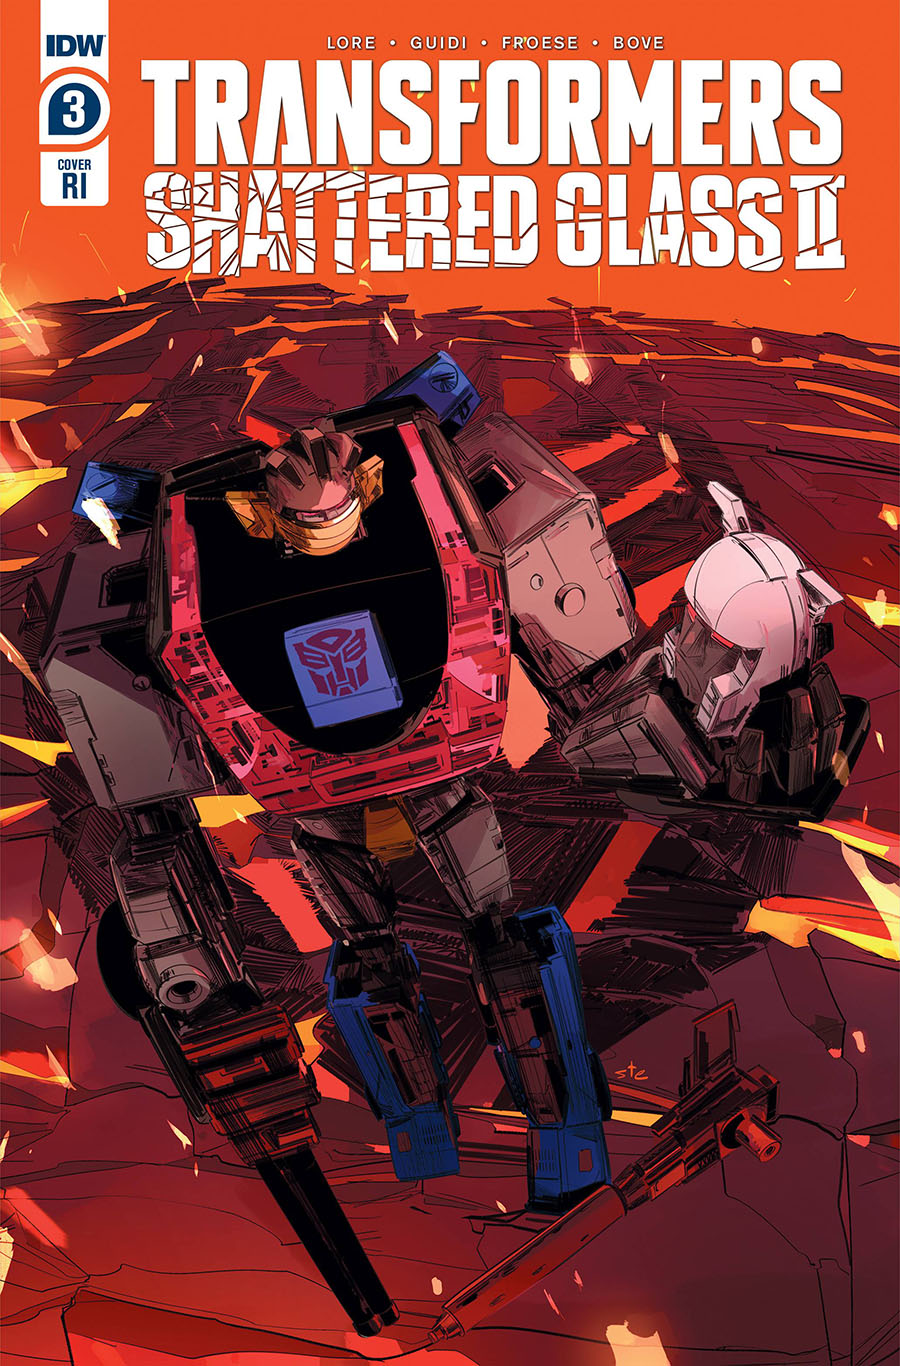 Transformers Shattered Glass II #3 Cover C Incentive Stefano Simeone Variant Cover